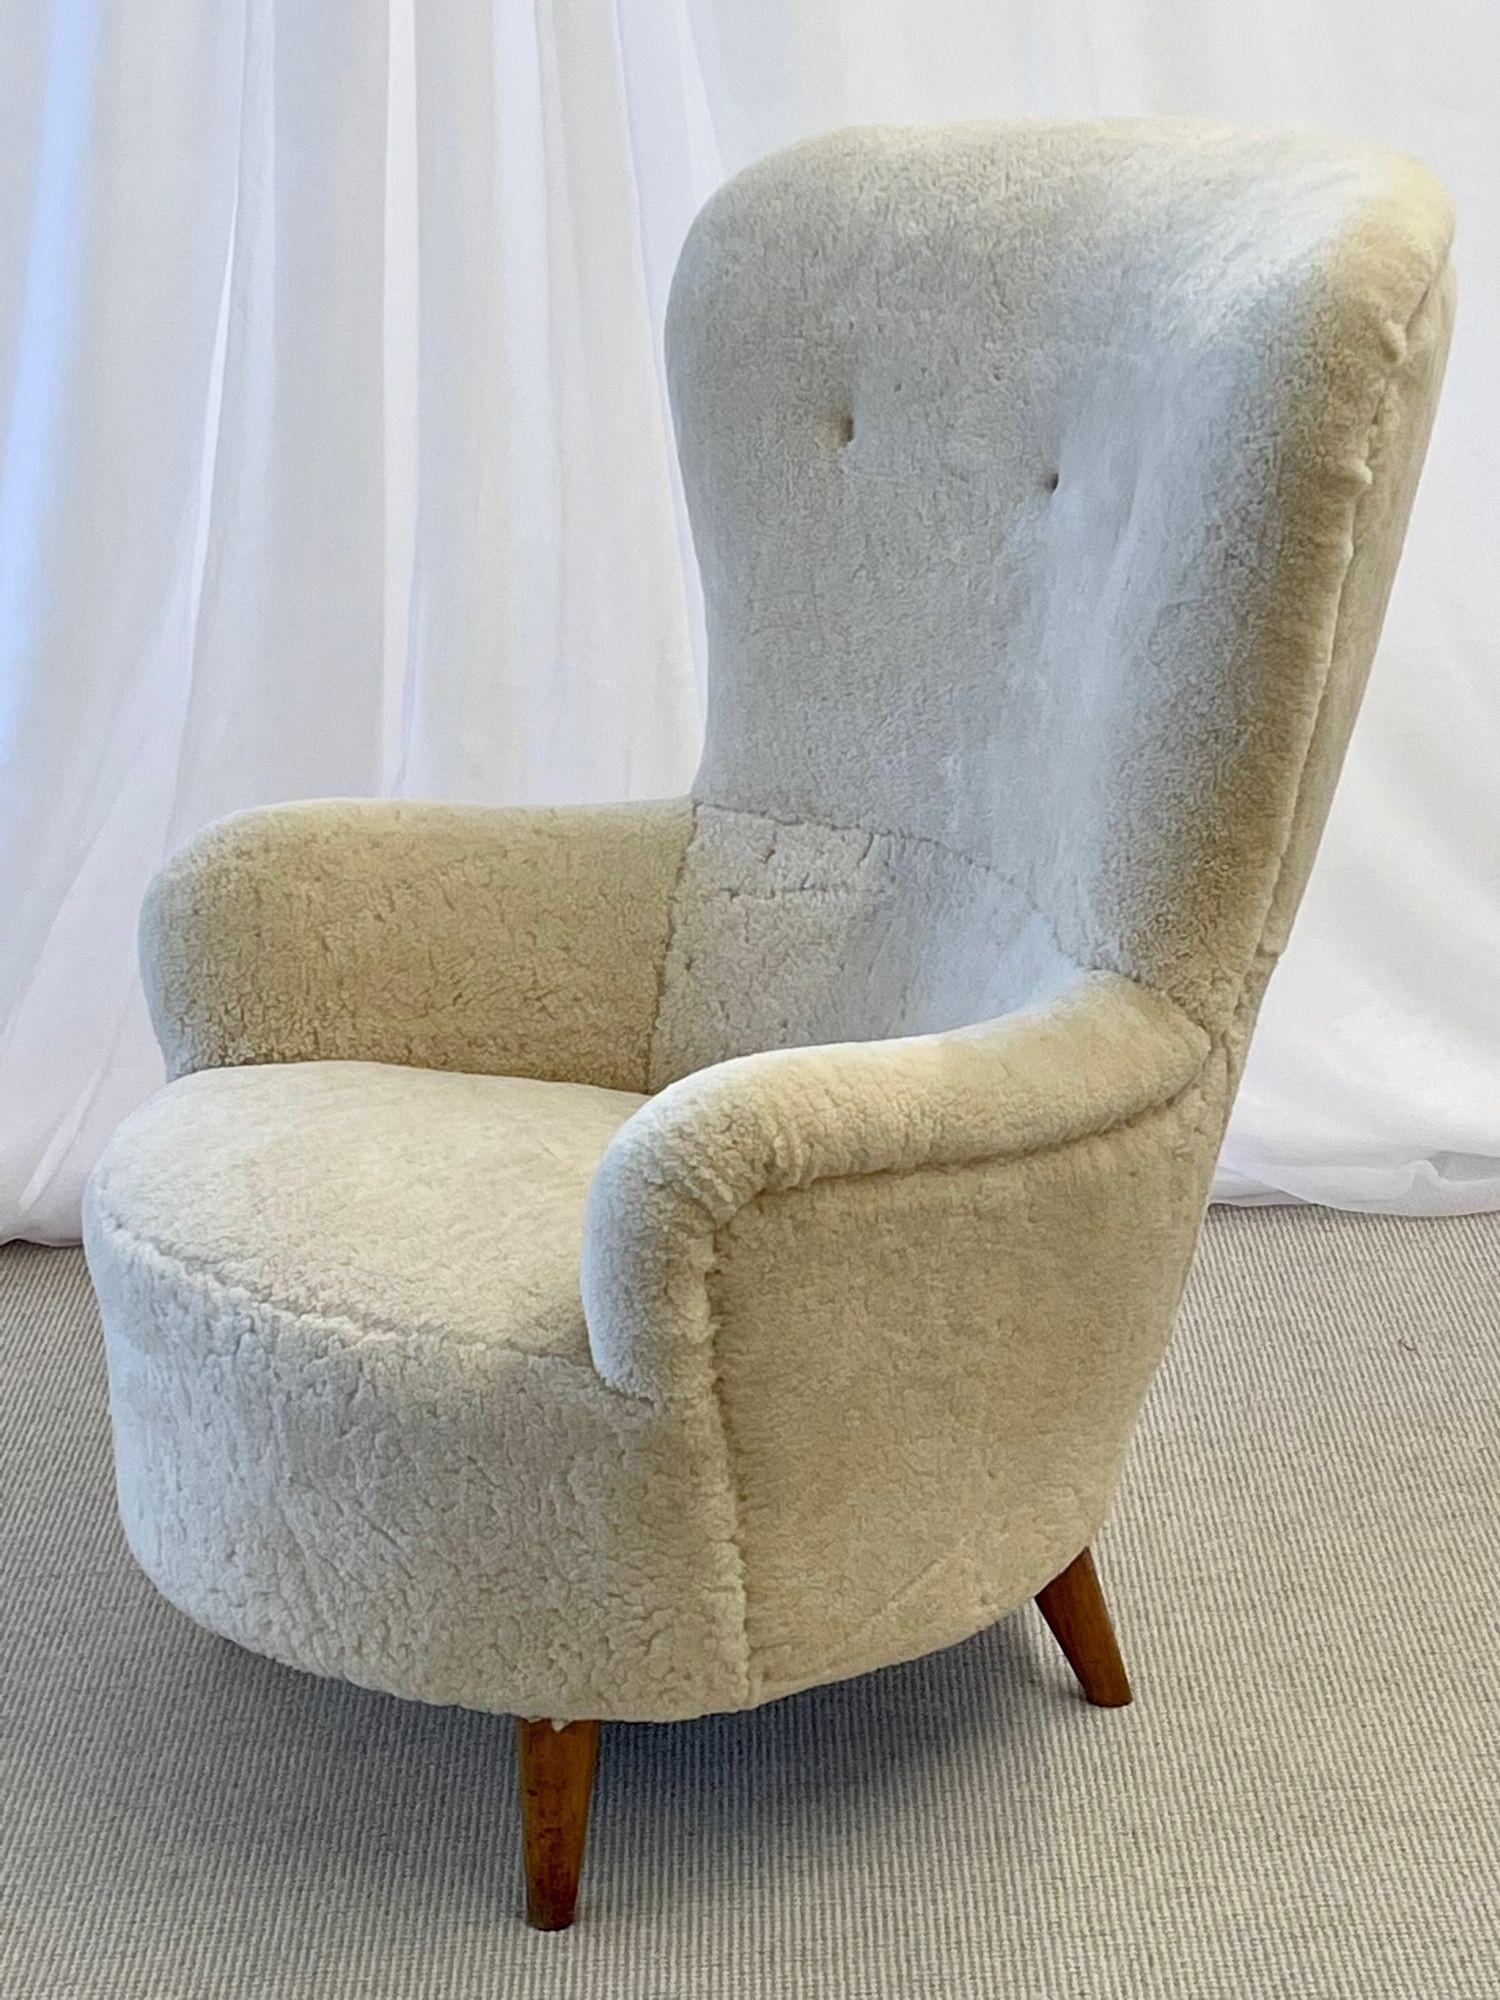 Mid-Century Modern organic form high-back Danish lounge chair, sheepskin, 1950s

Otto Schultz Style
 
Beige sheepskin, lacquered wood
Denmark, 1950s
 
Seat height: 17.5 inches 
 
Other Scandinavian designers of the period include Finn Juhl, Kaare